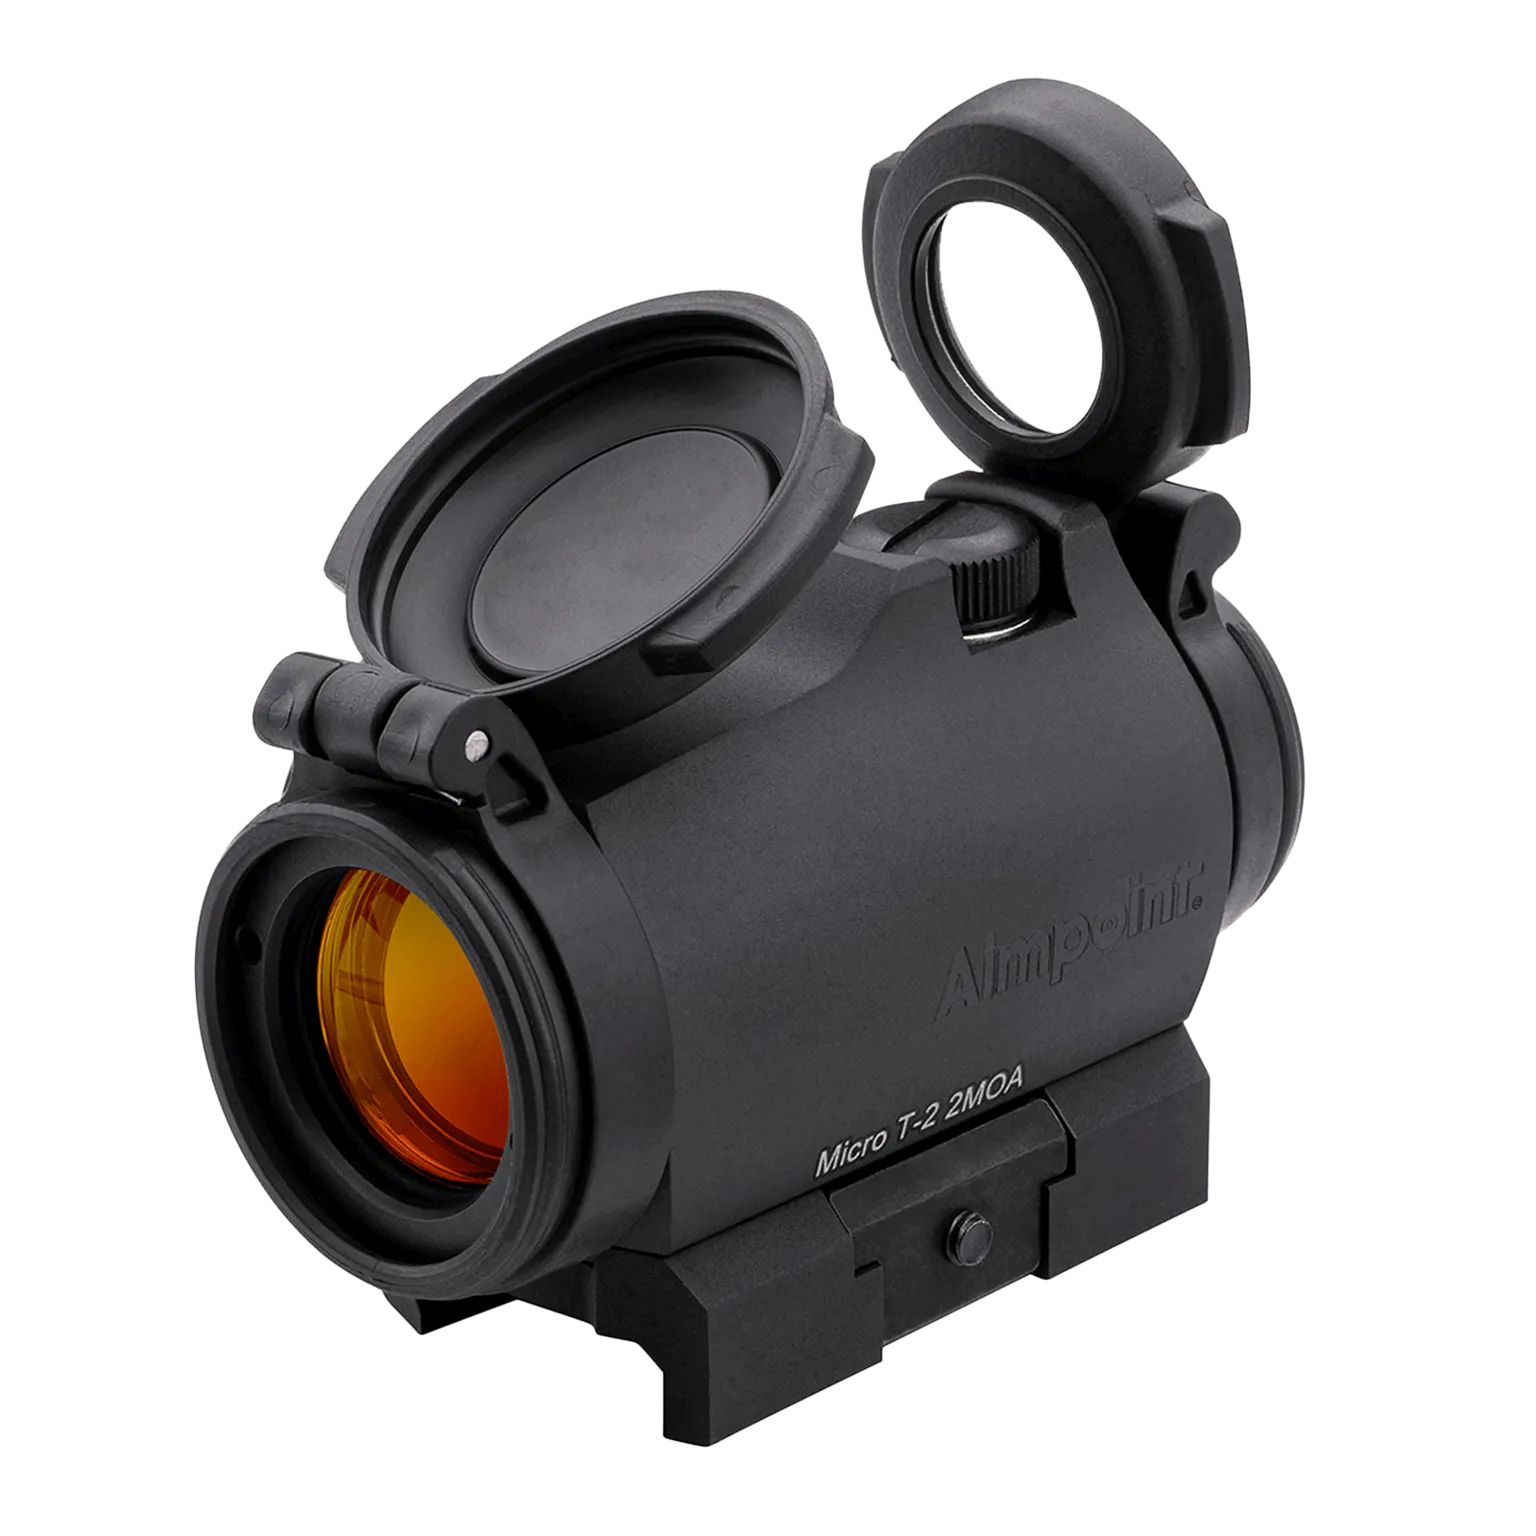 Micro T-2™ 2 MOA - Red dot reflex sight with standard mount for Weaver/Picatinny - 1